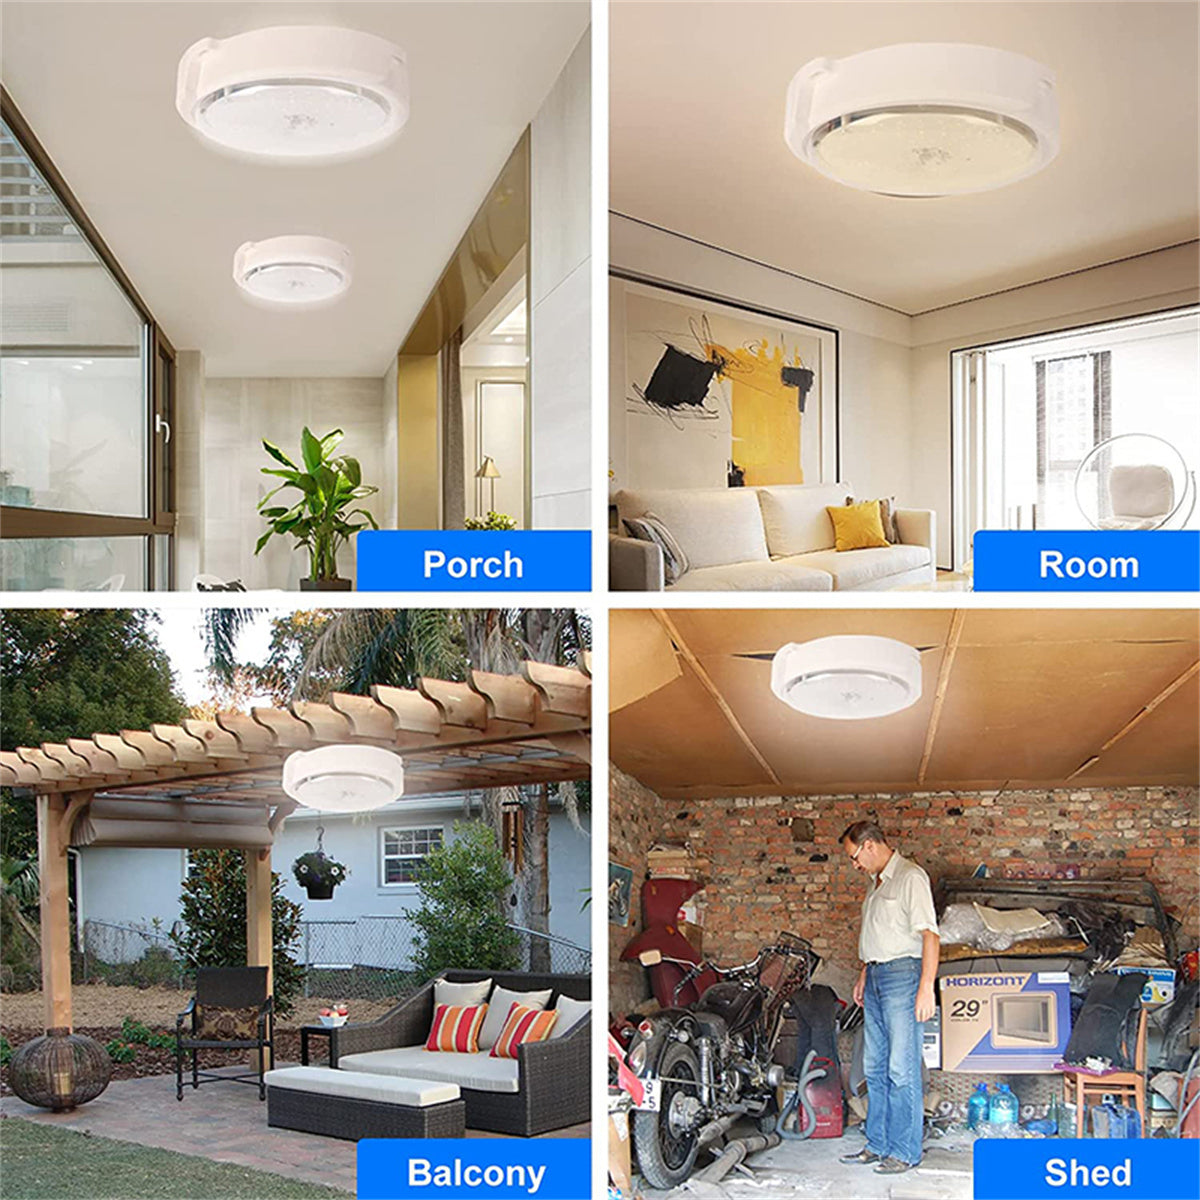 Solar Ceiling Light, 5000LM Solar Lights Indoor Outdoor, Brighter Solar Shed Lights with Remote Control, Cool White/Warm White Switchable Solar Pendant Light for Barn, Porch, Patio, Gazebo